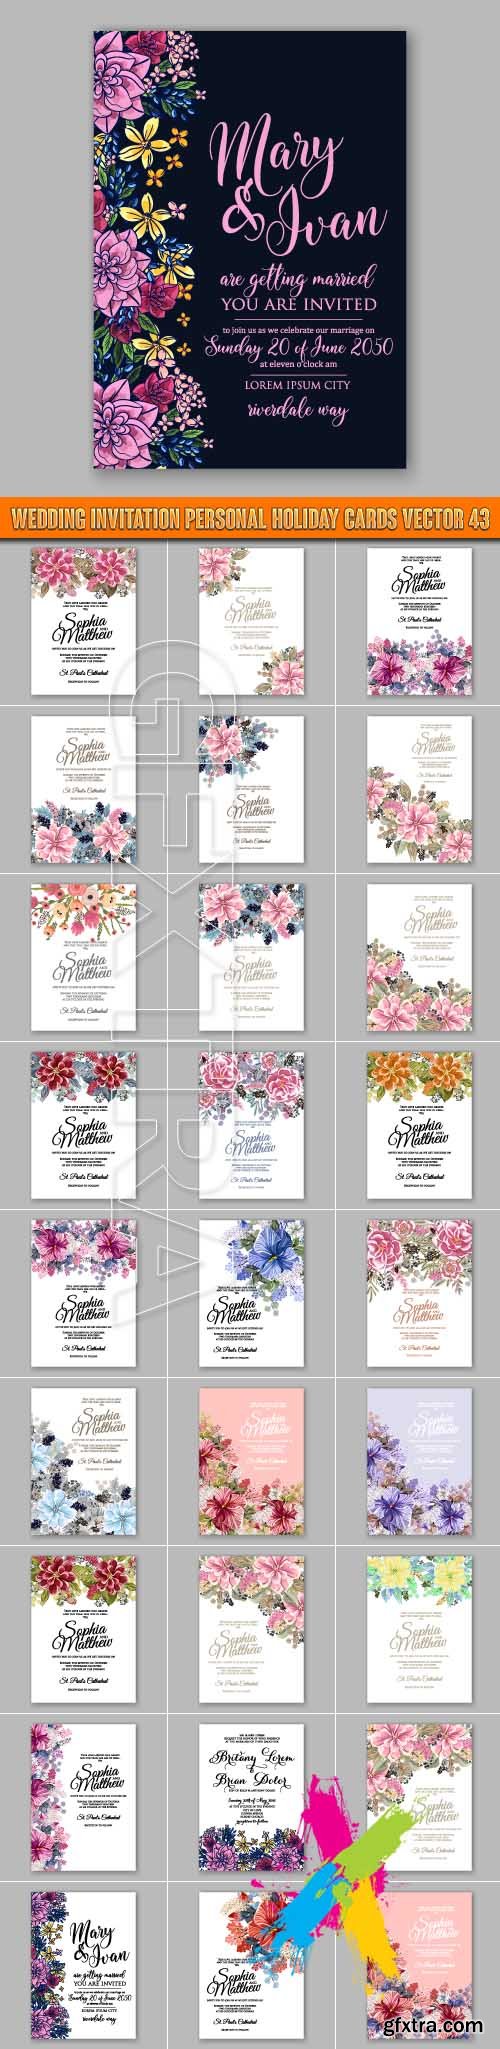 Wedding invitation personal holiday cards vector 43